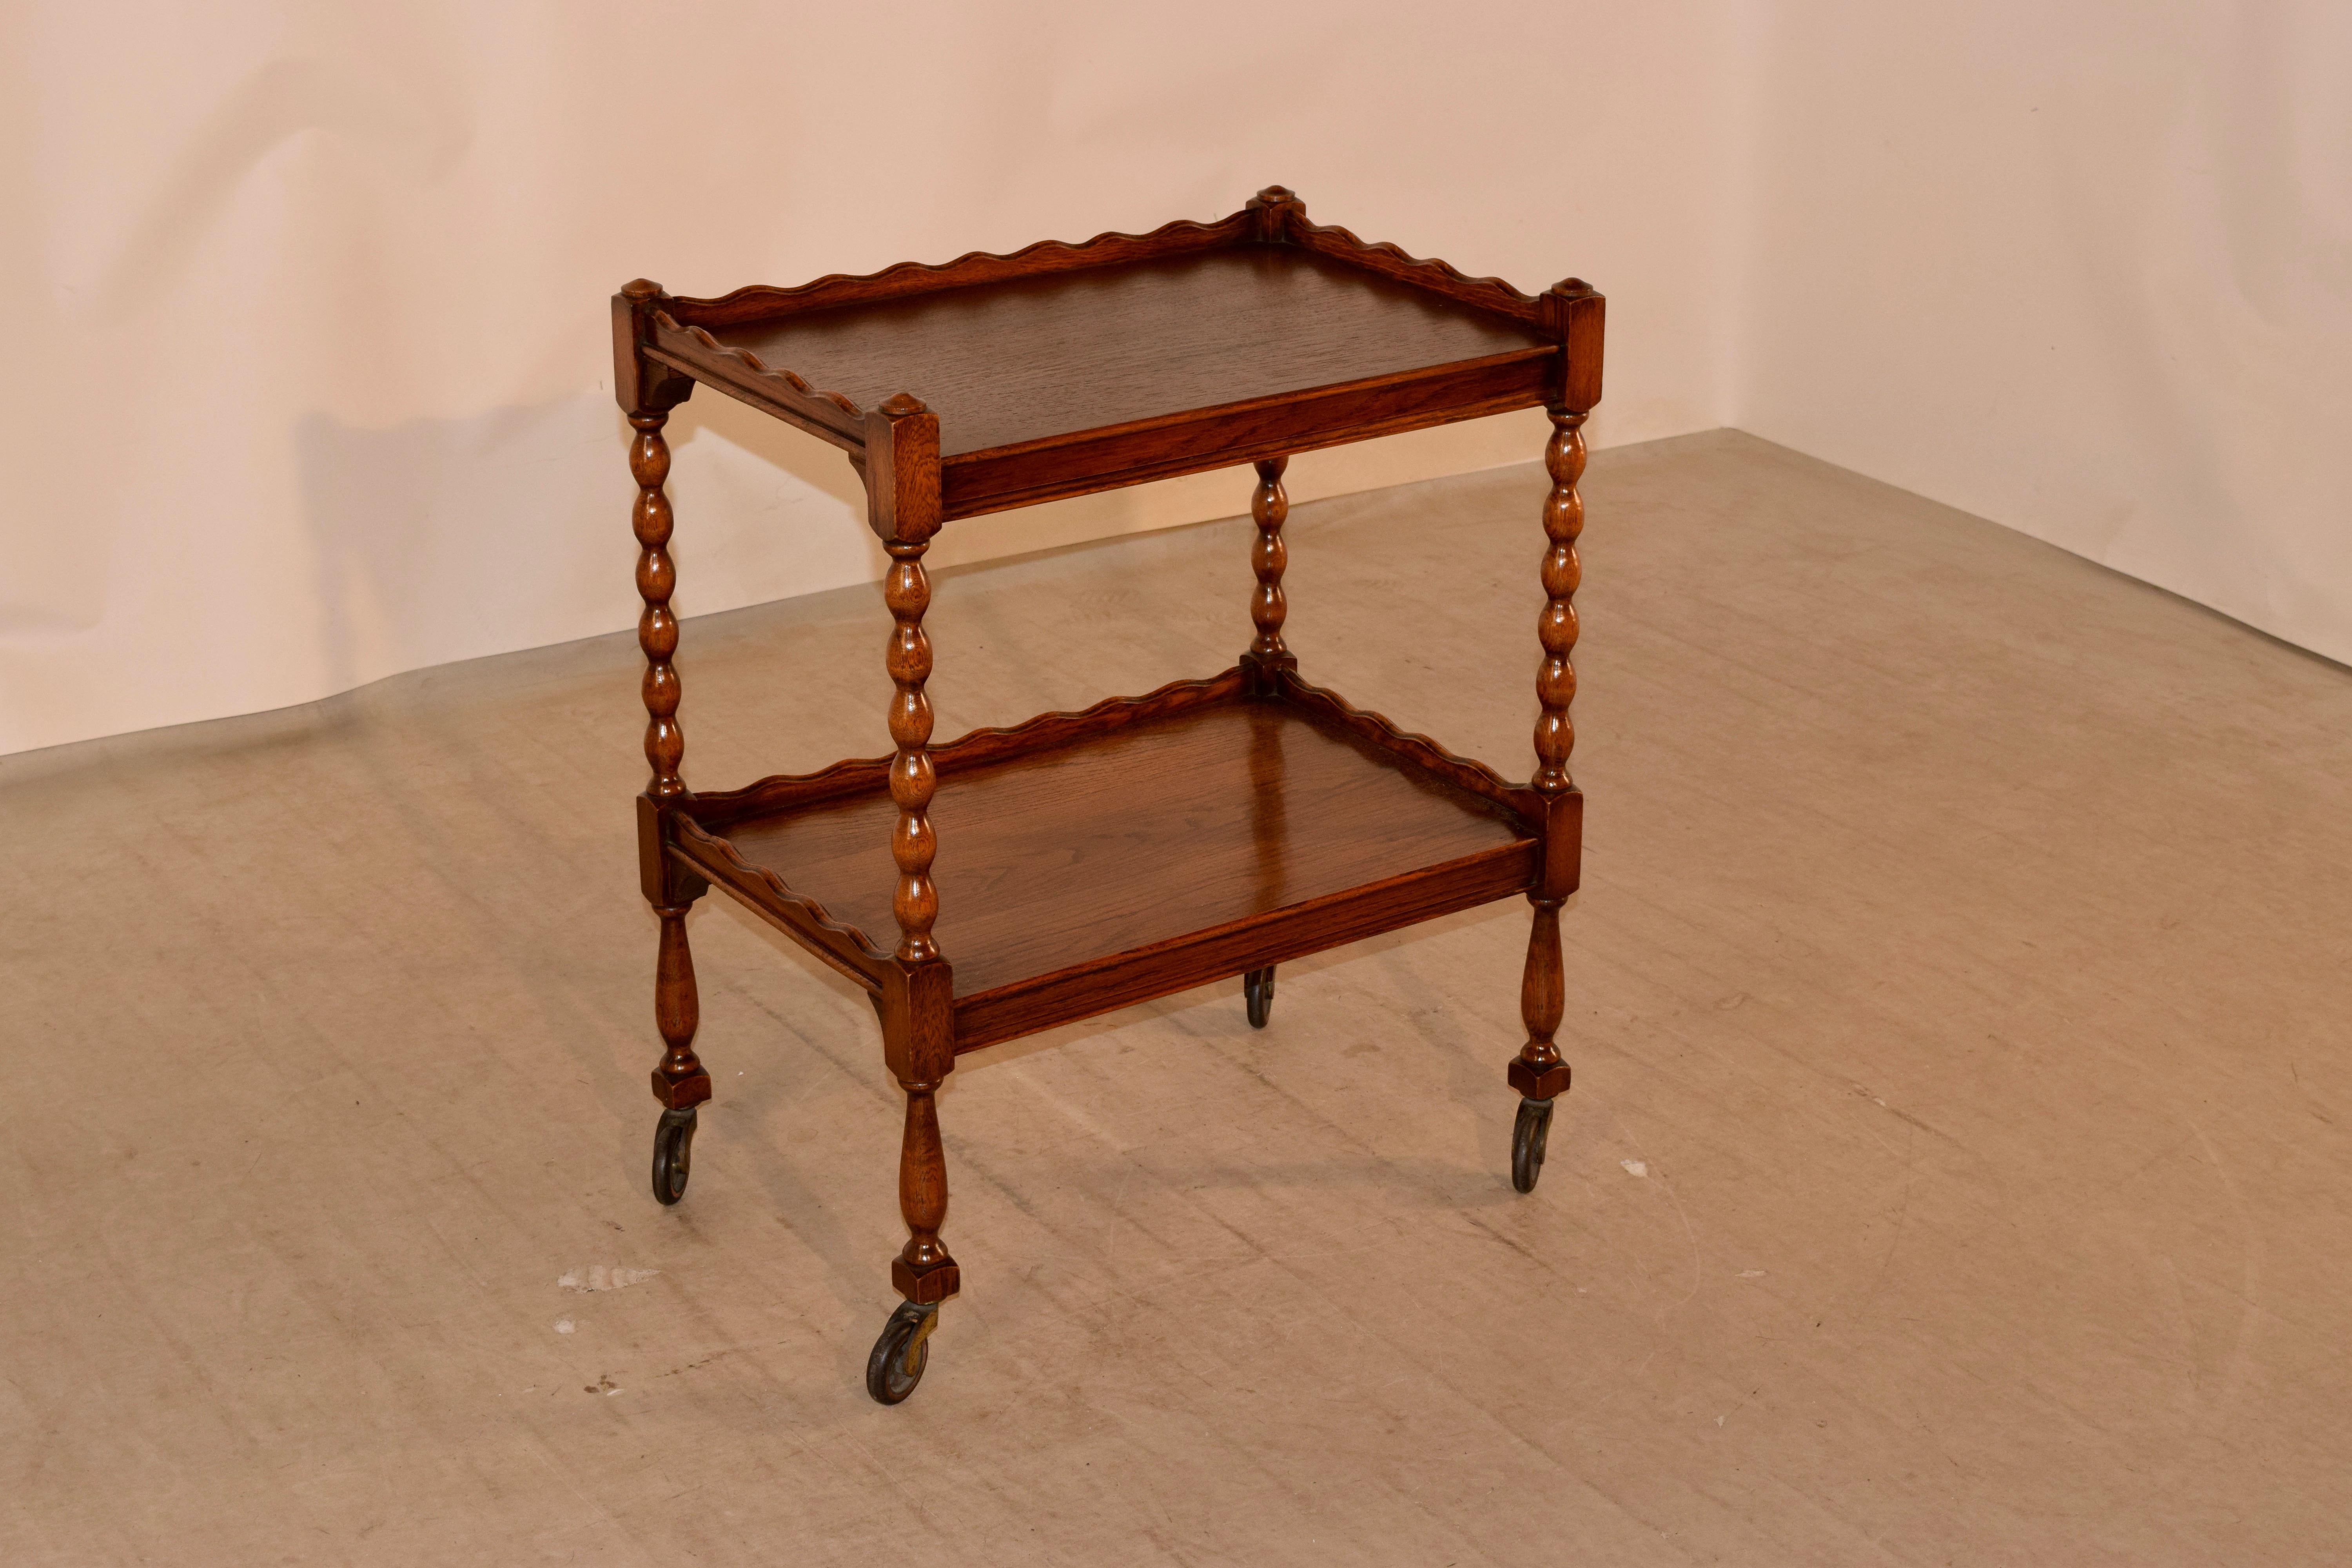 19th century English oak drinks cart with a scalloped gallery around the top following down to a shelf, which is separated from the lower shelf by hand-turned bobbin turned shelf supports. The lower shelf also has a scalloped gallery as well, and